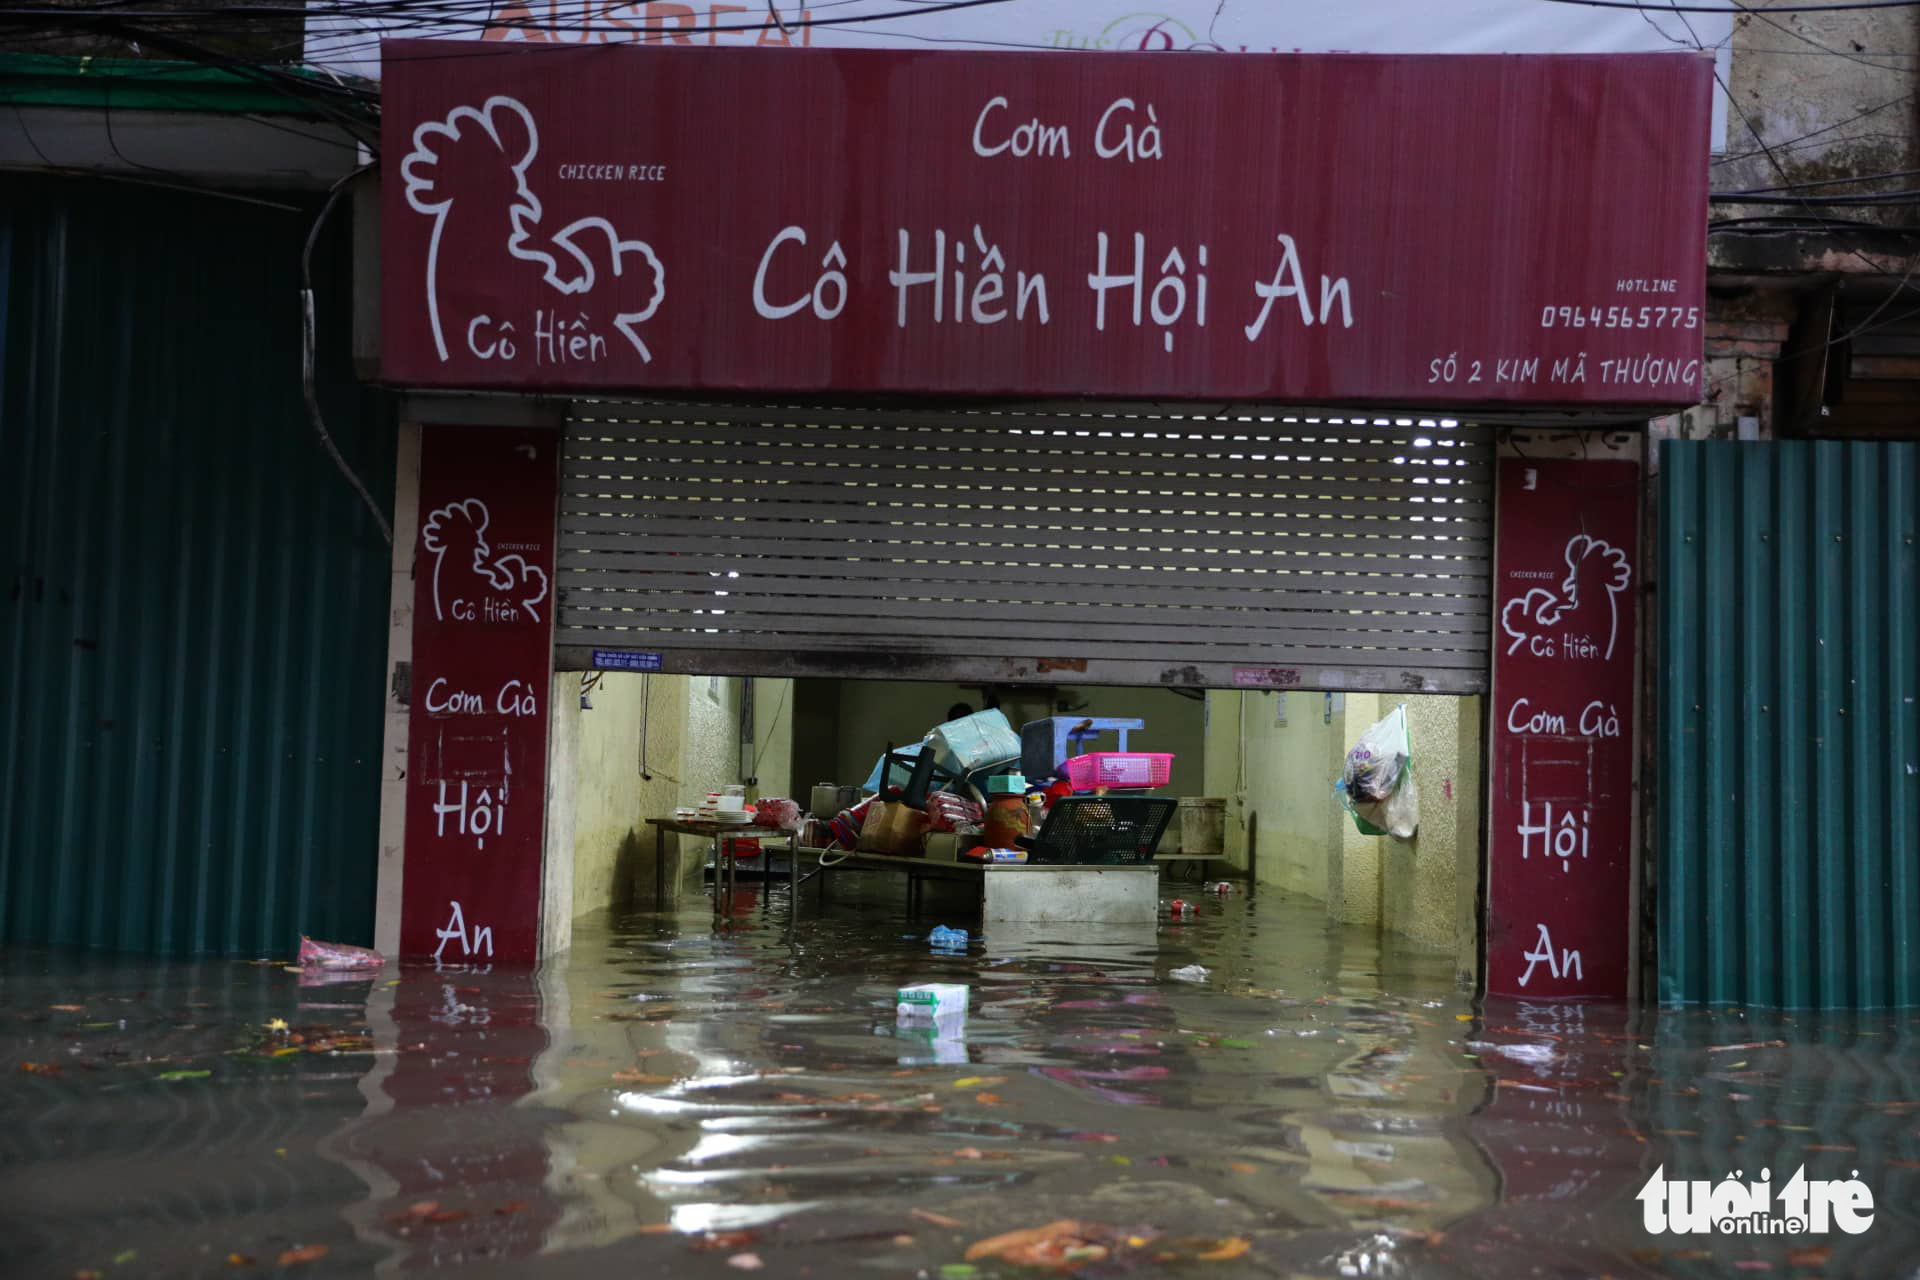 Rainwater pours into an eatery on Kim Ma Thuong Street in Hanoi, May 29, 2022. Photo: Danh Khang / Tuoi Tre